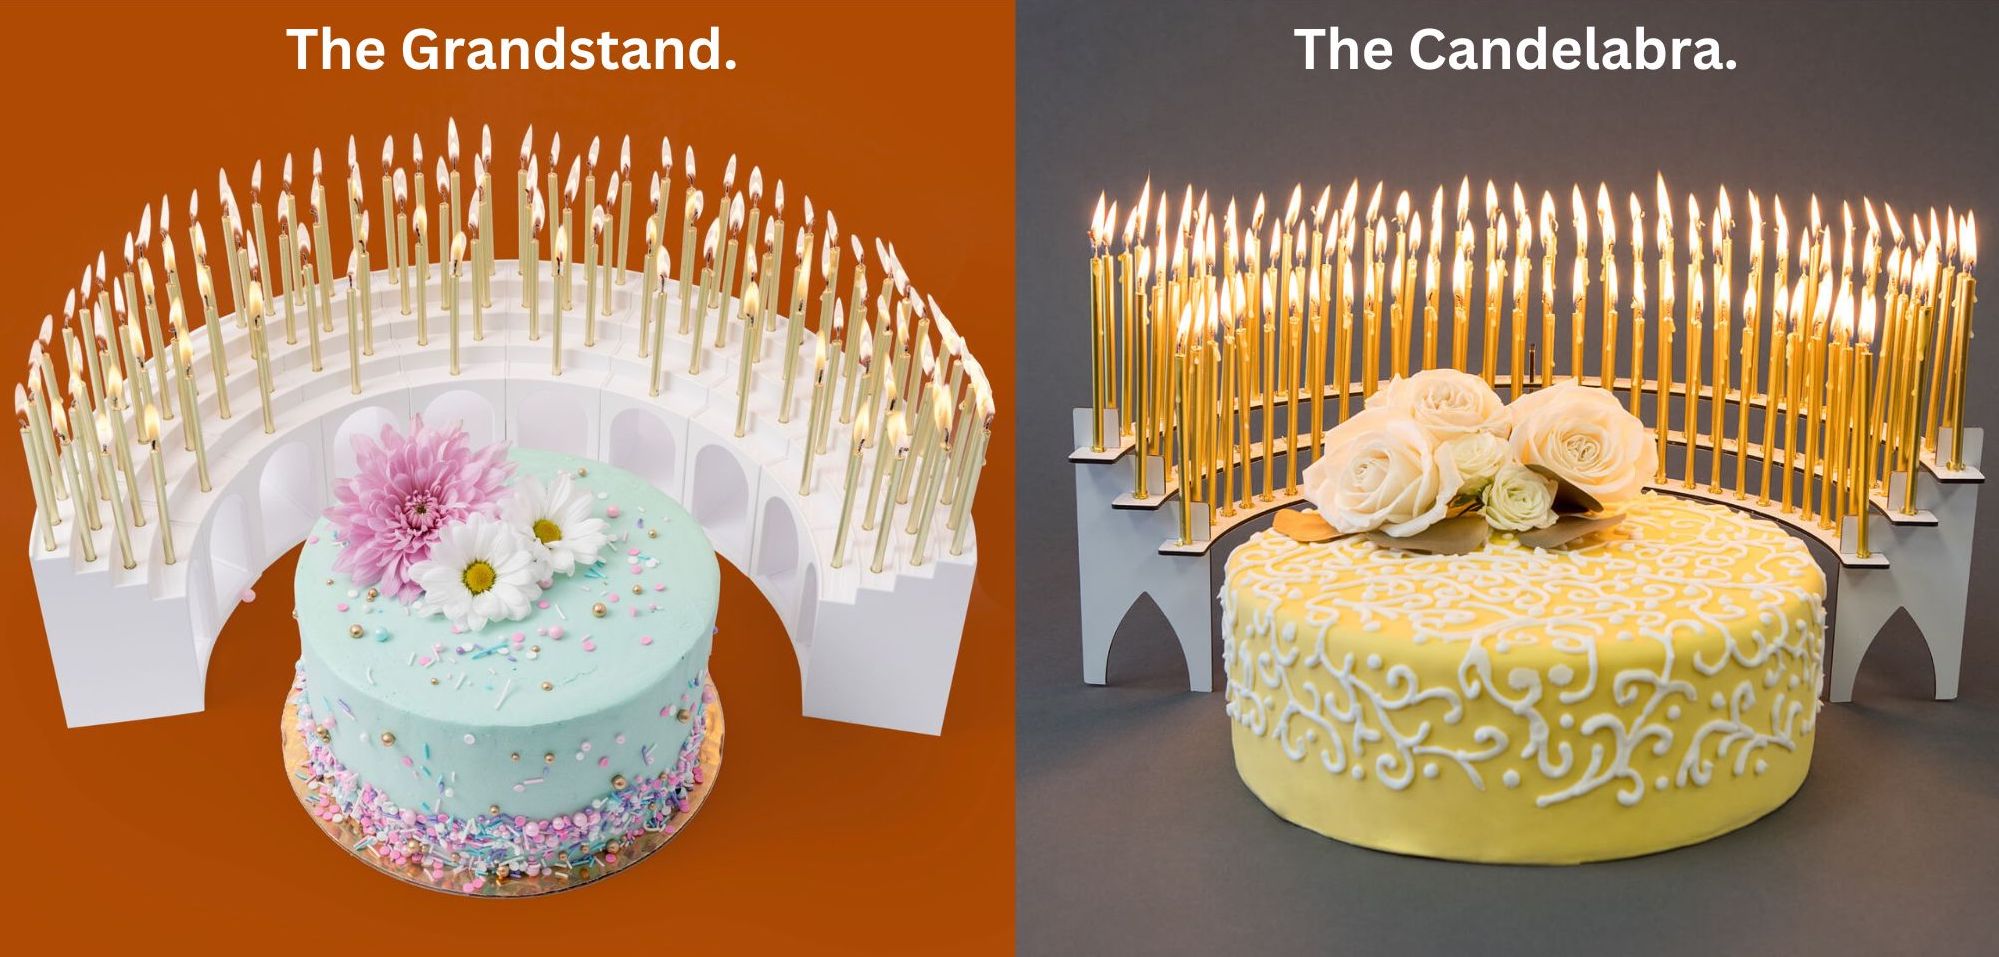 Two models of birthday candle holders, The Grandstand and The Candelabra